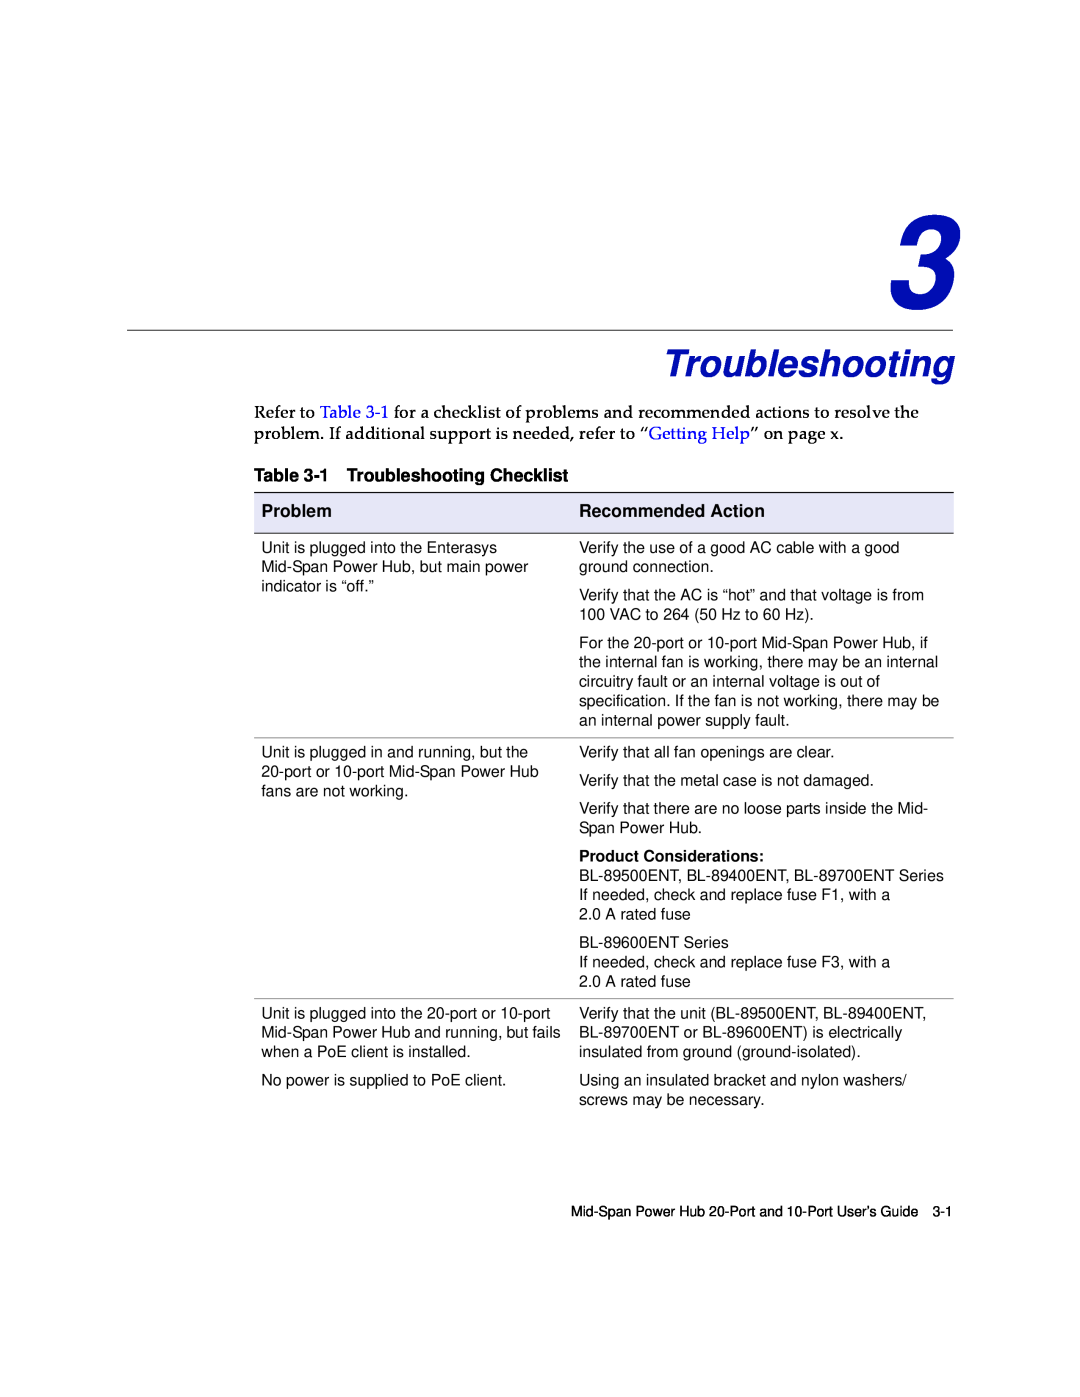 Enterasys Networks BL-89520ENT manual 1 Troubleshooting Checklist, Problem, Recommended Action, Product Considerations 